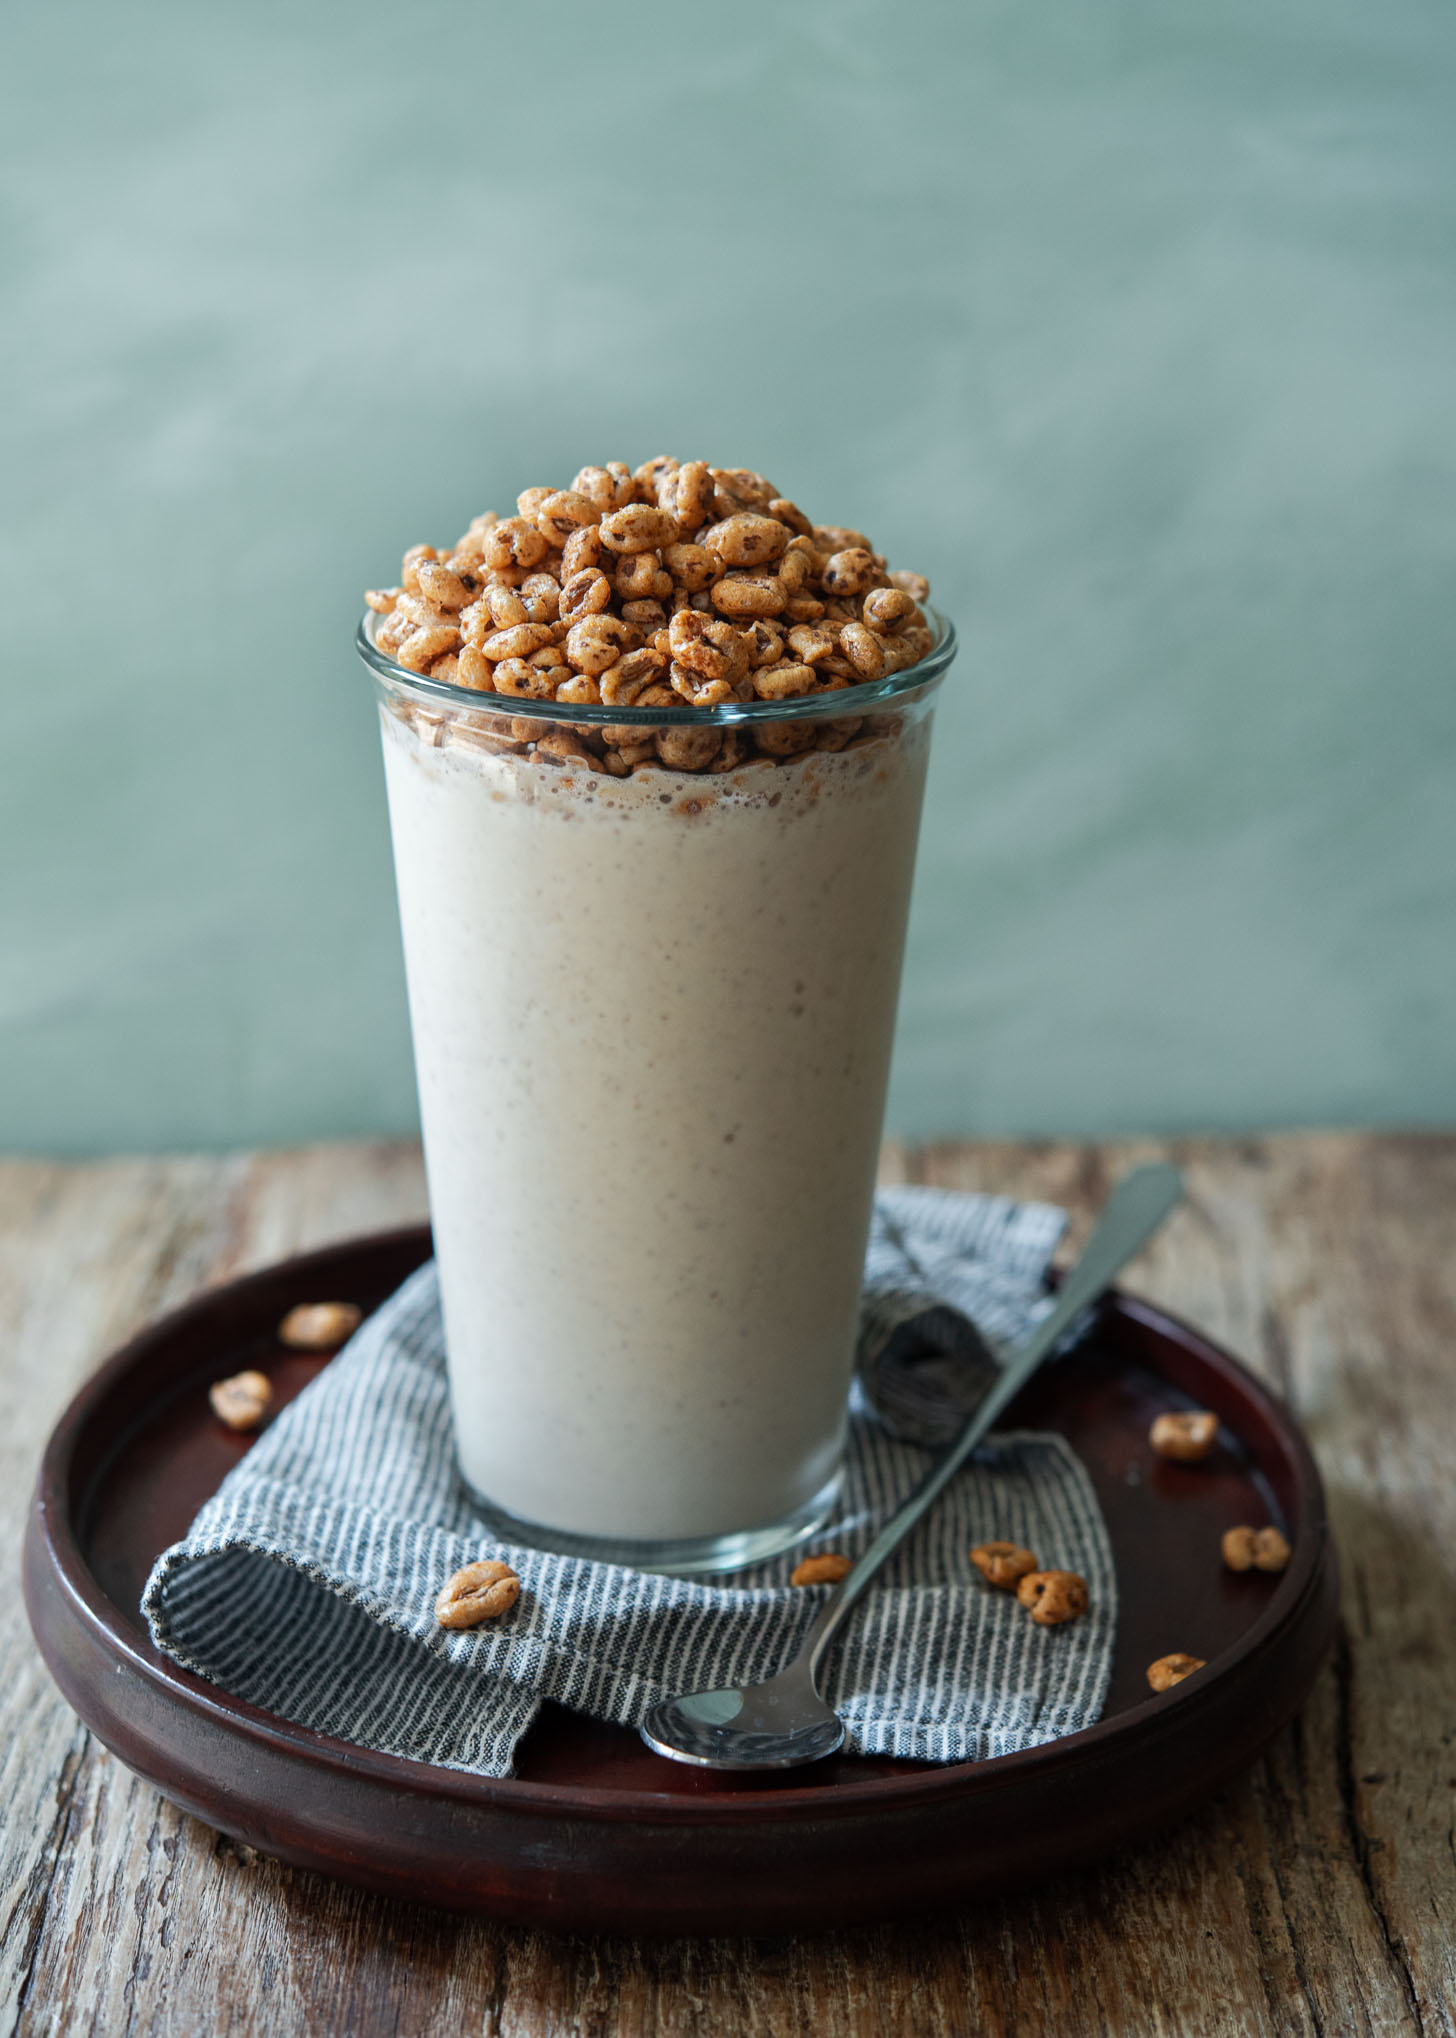 Korean cereal milkshake topped with jolly pong cereal in a glass.